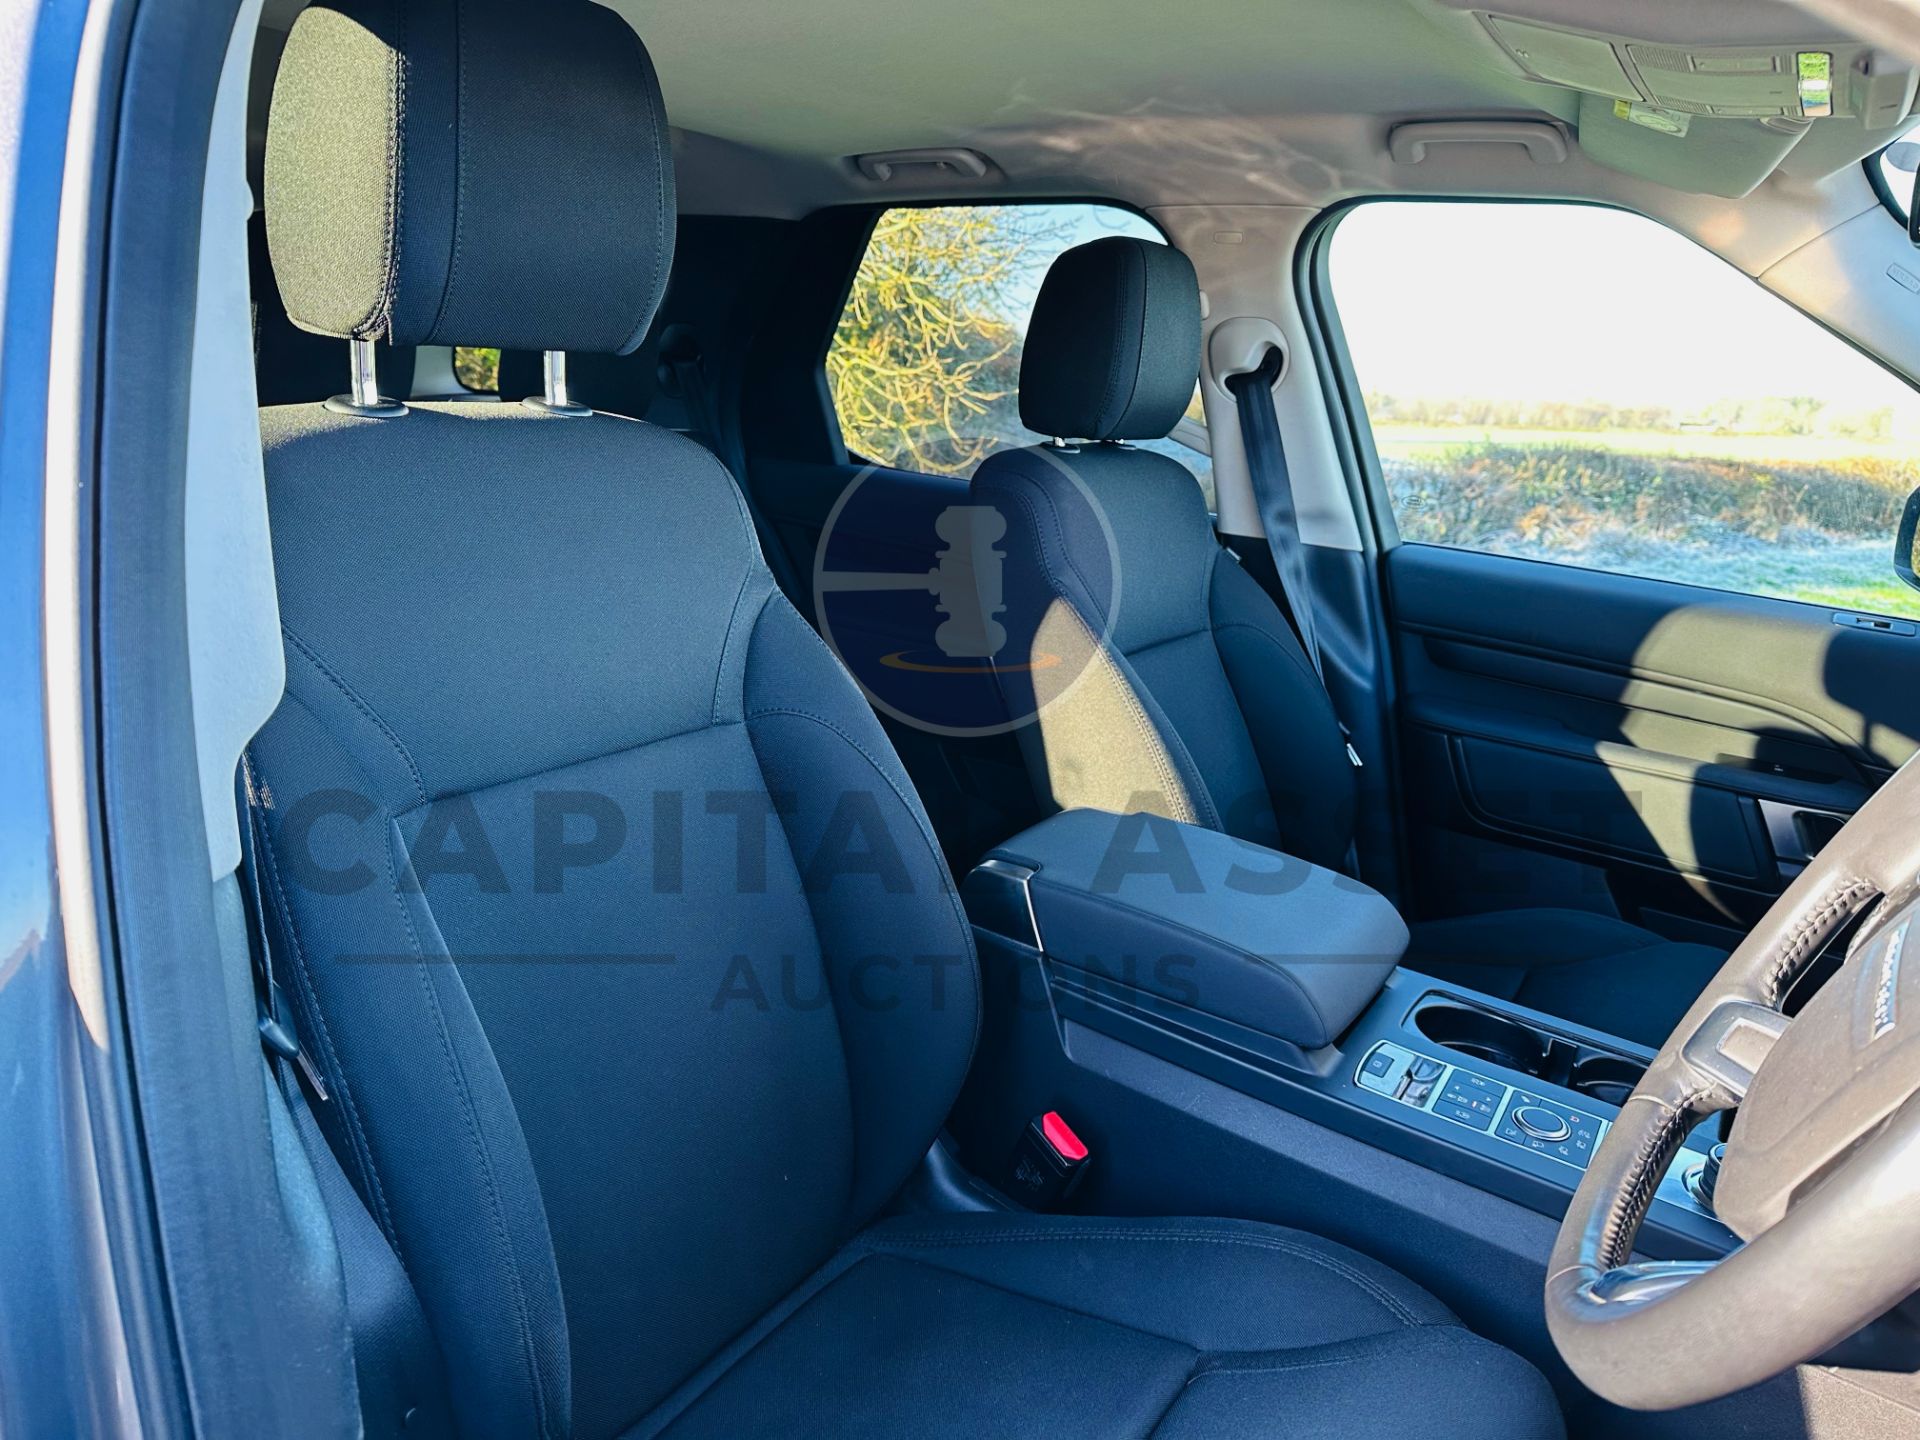 (ON SALE) LAND ROVER DISCOVERY 5 "AUTO DIESEL - 7 SEATER SUV - 2019 MODEL - ONLY 22K MILES FROM NEW - Image 26 of 41